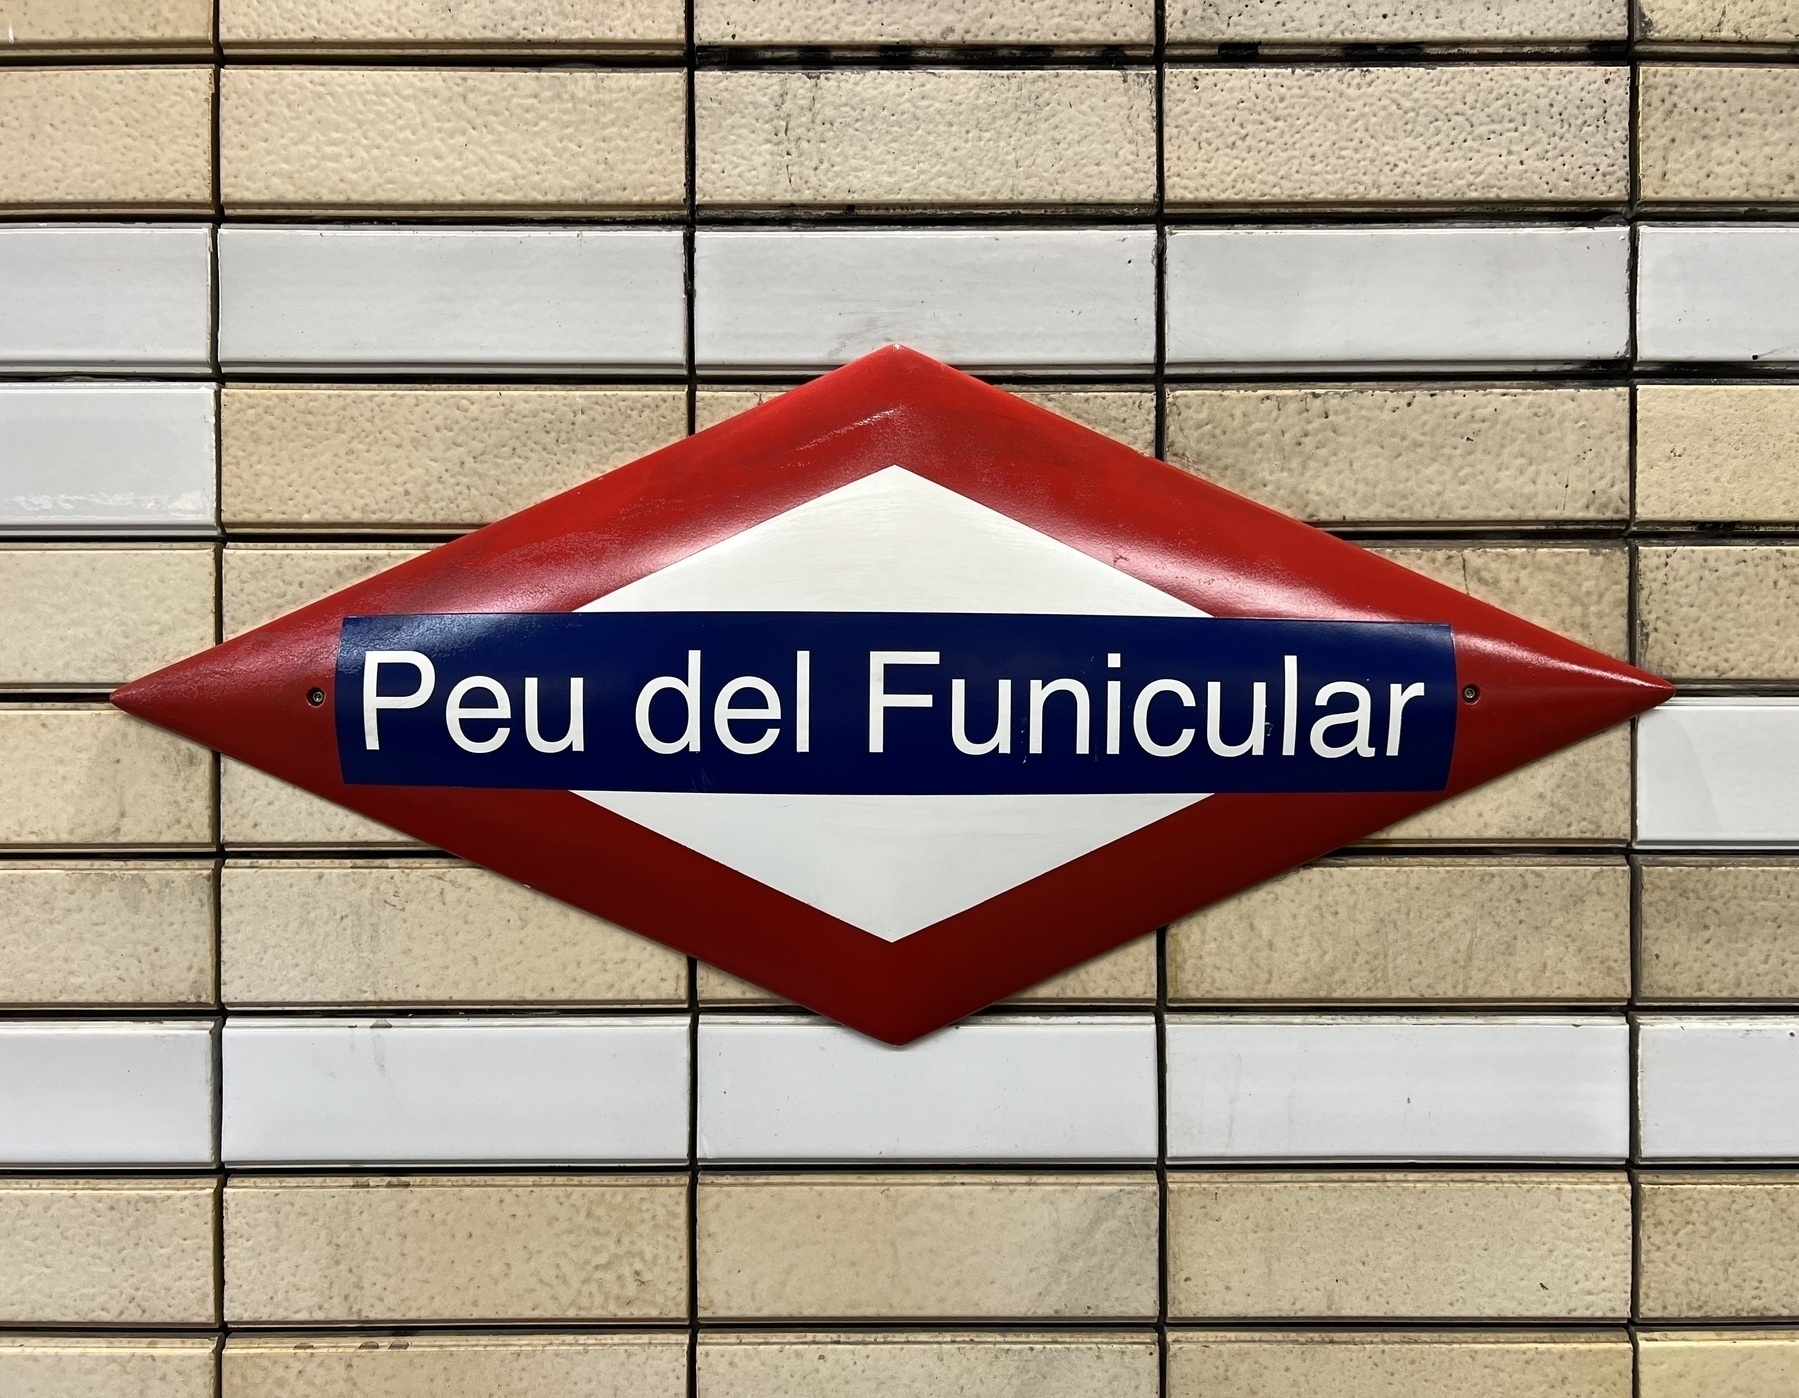 A sign in a red diamond that says “Peu del Funicular”